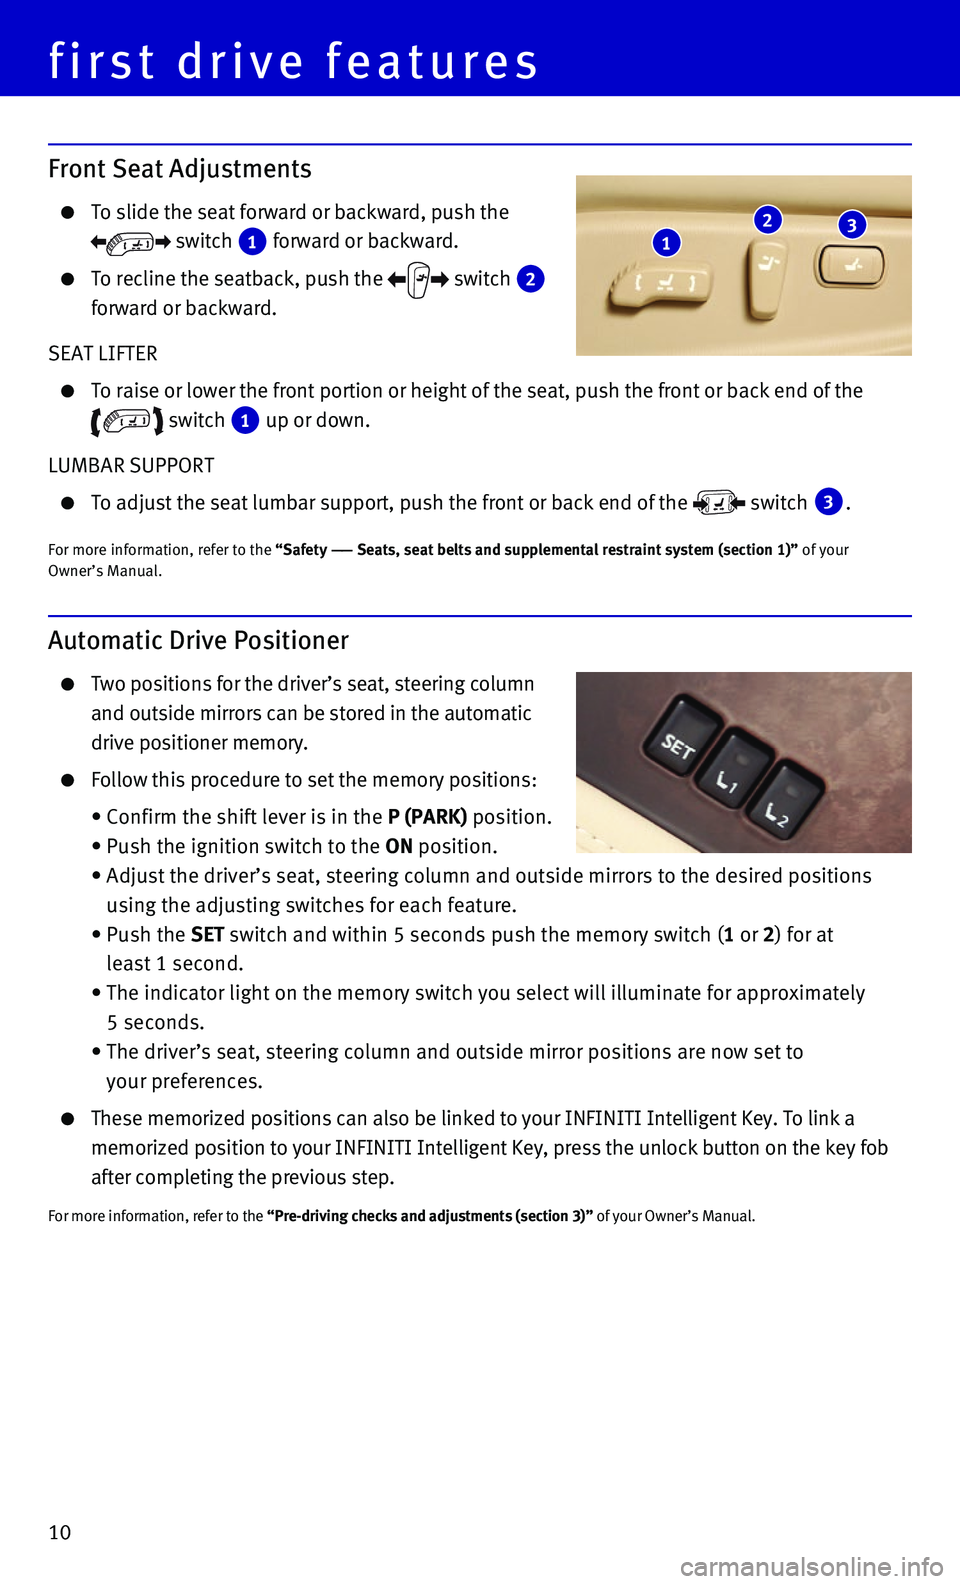 INFINITI QX80 2015  Quick Reference Guide 10
first drive features
Front Seat Adjustments
    To slide the seat forward or backward, push the 
 switch  1 forward or backward.
    To recline the seatback, push the  switch  2 forward or backward